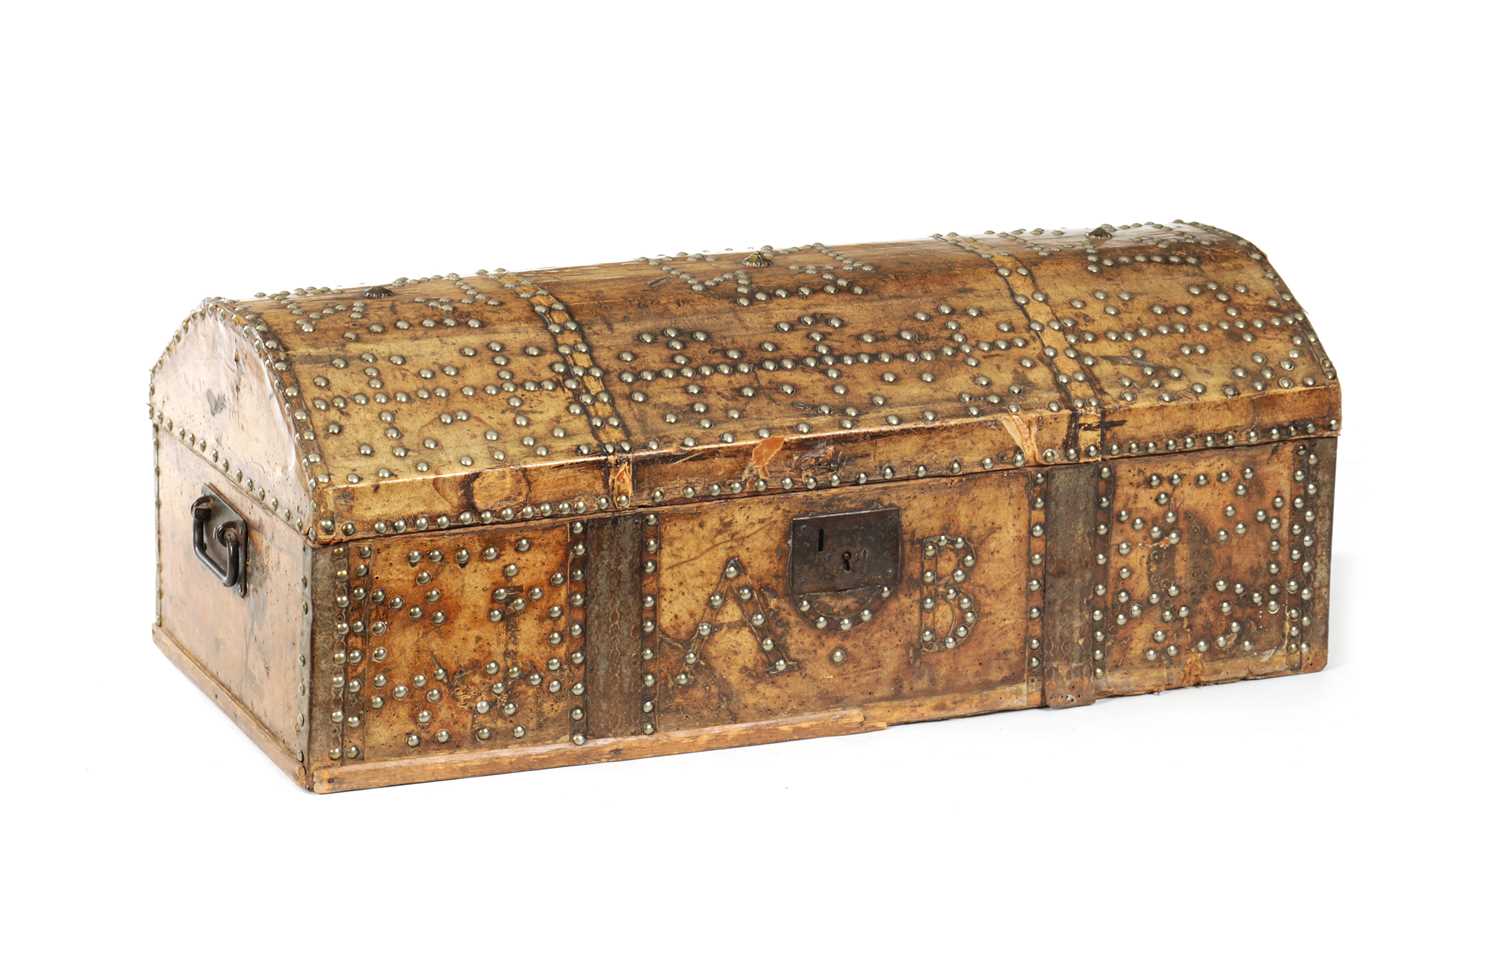 A 17TH CENTURY DOME TOP STUDDED LEATHER TRUNK